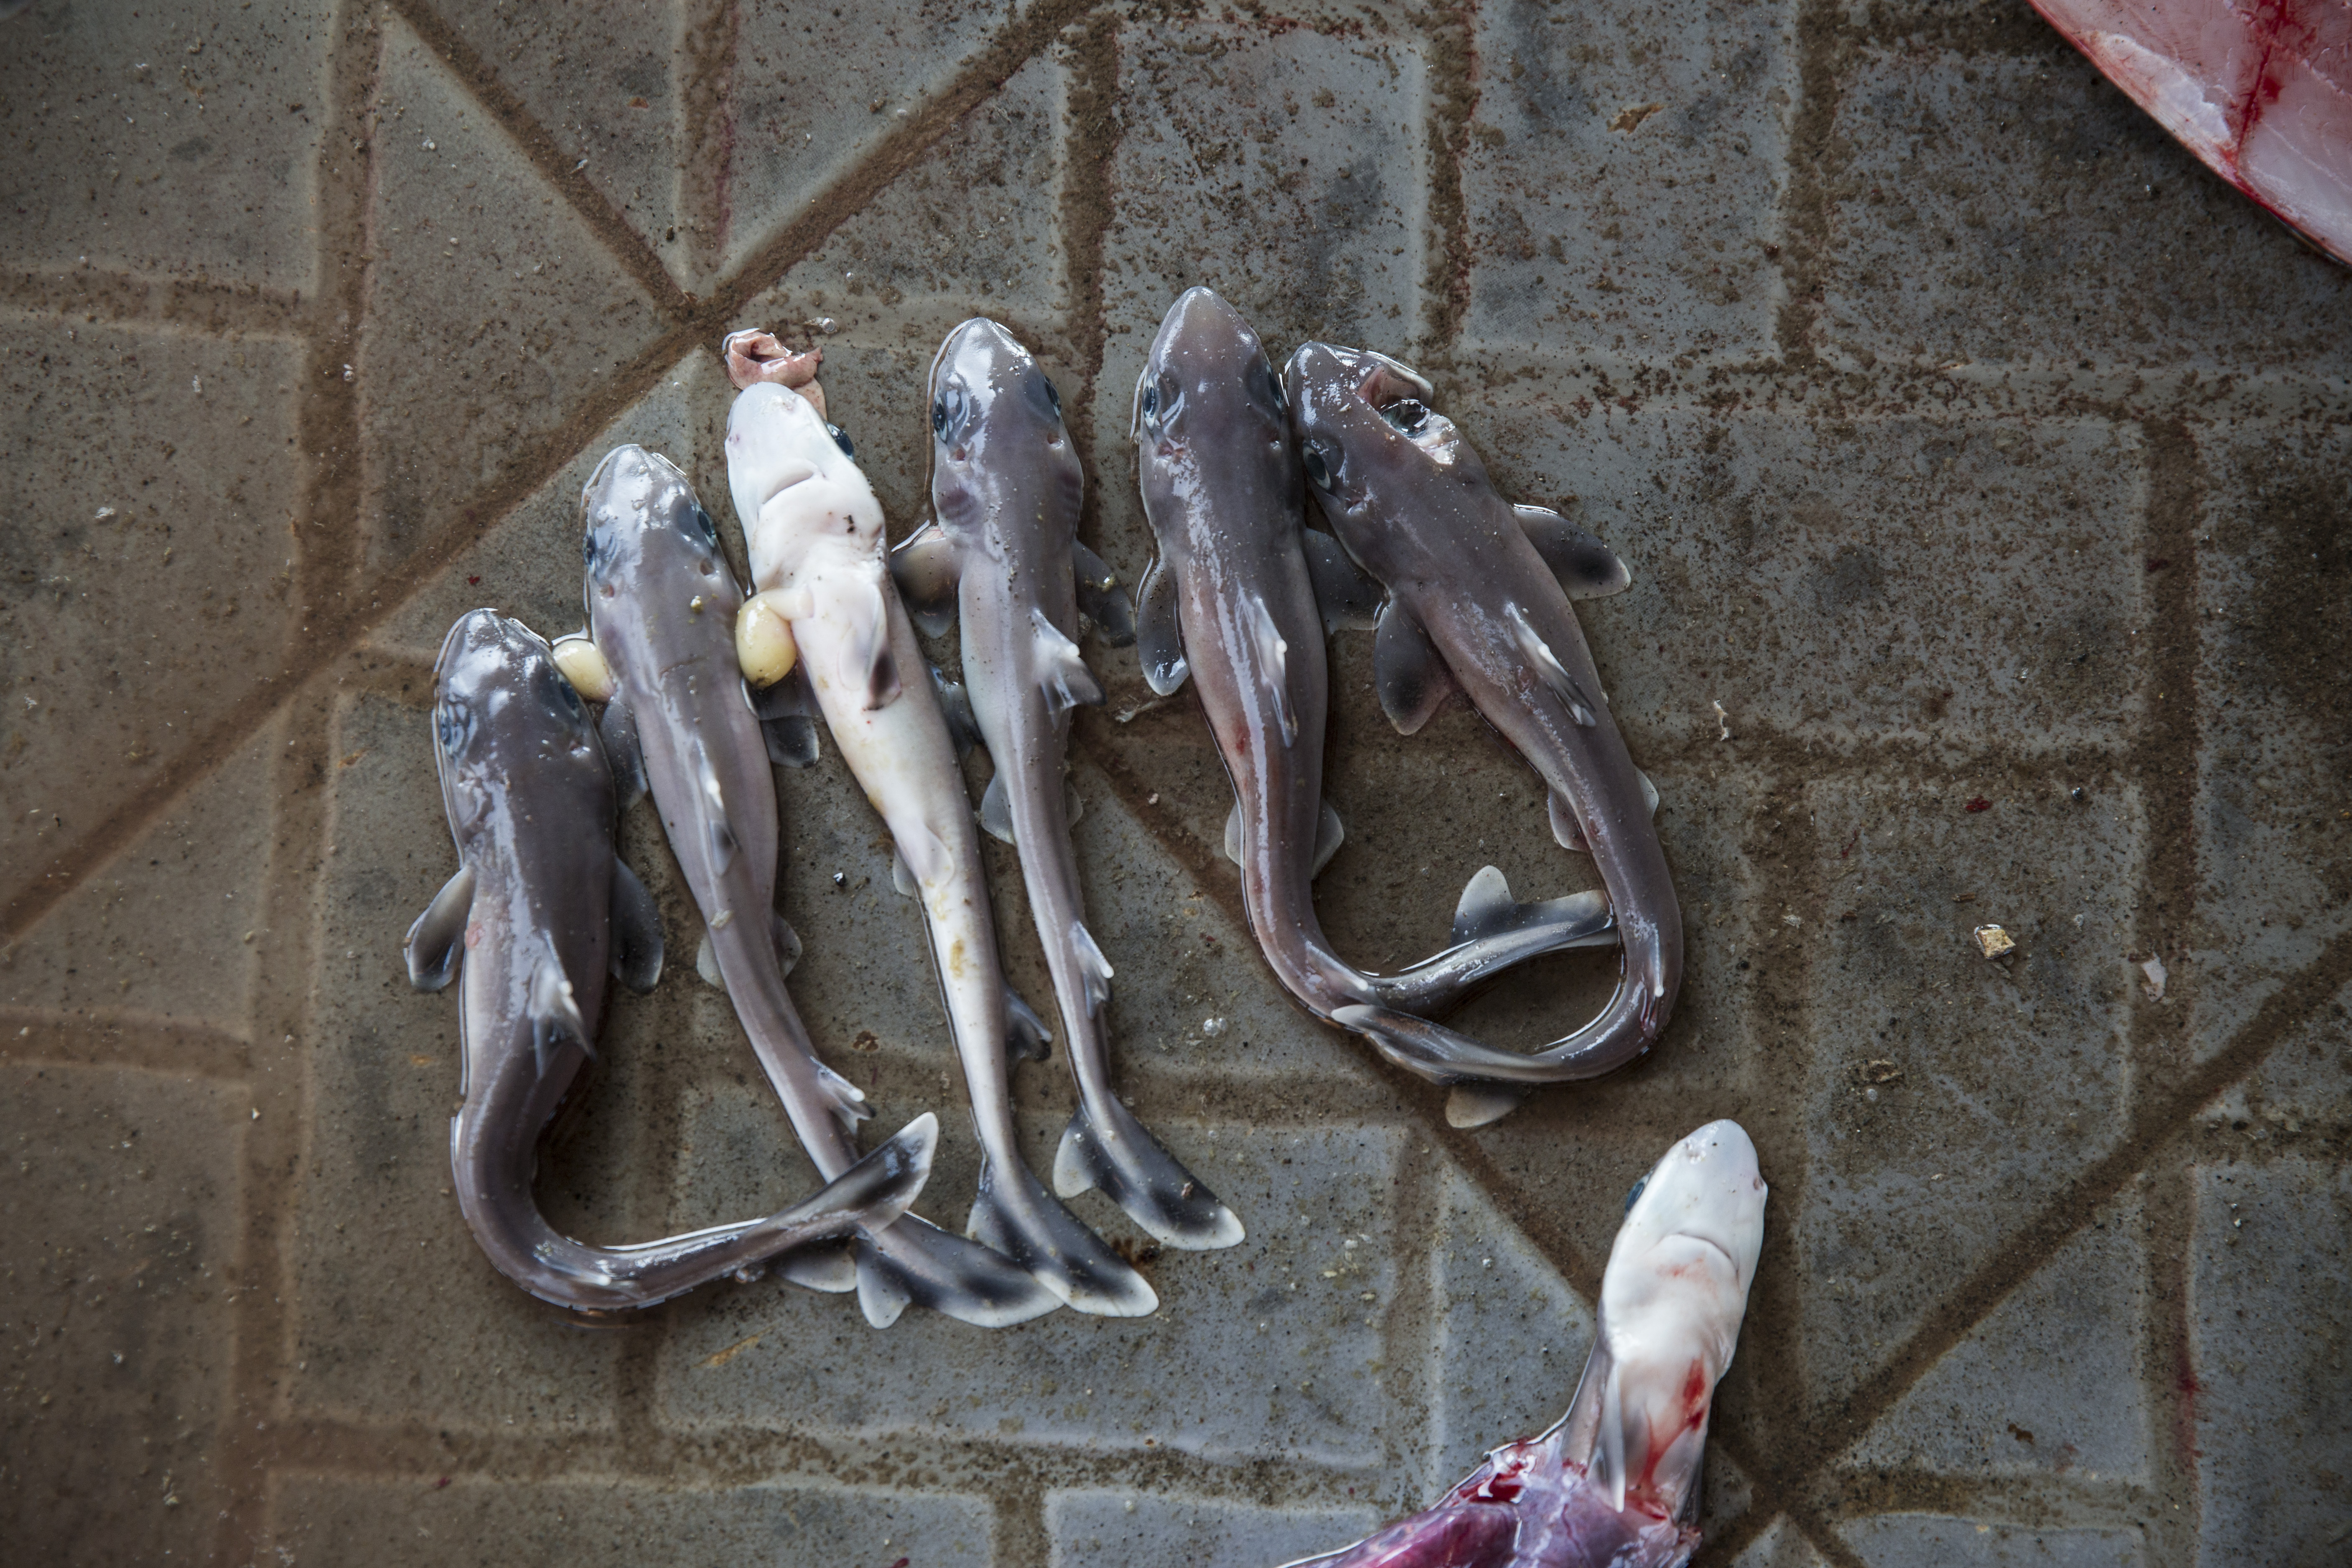 A visit to the Tanjong Luar market reveals the harsh realities of the shark-finning industry, where unborn baby sharks are tossed out after adult sharks are finned. 